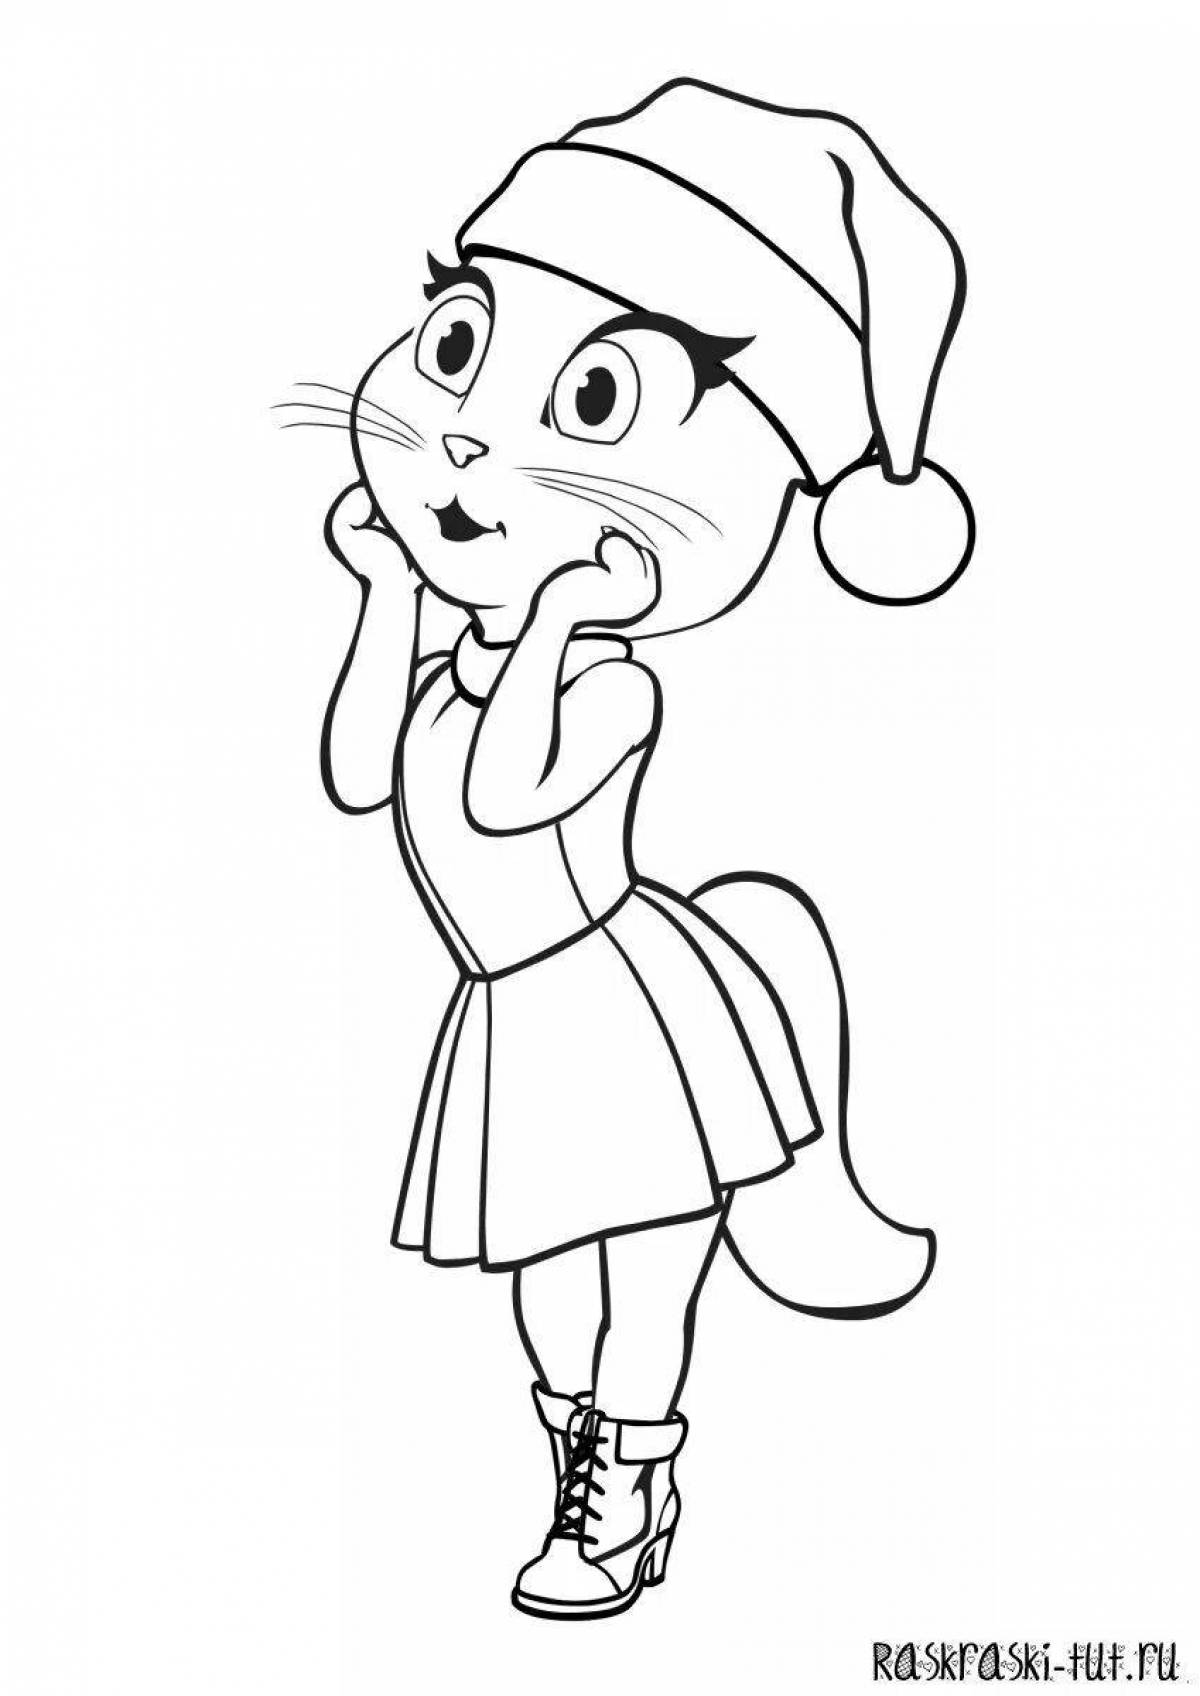 Angela's playful coloring page for kids